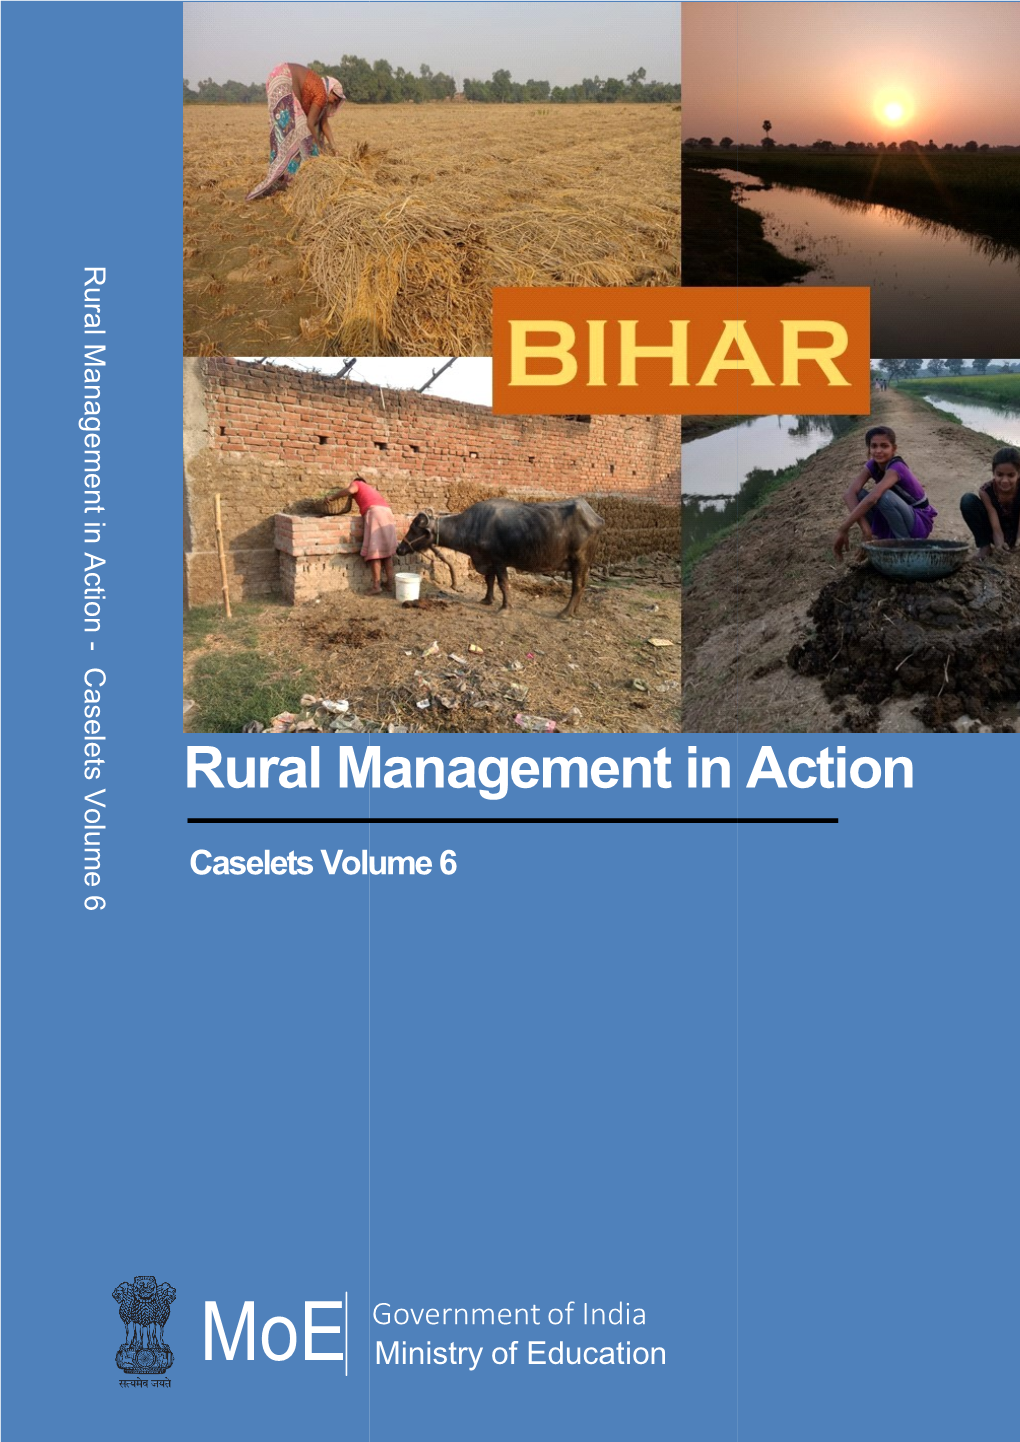 Rural Management in Action- Caselets Volume 6 Ii MGNCRE